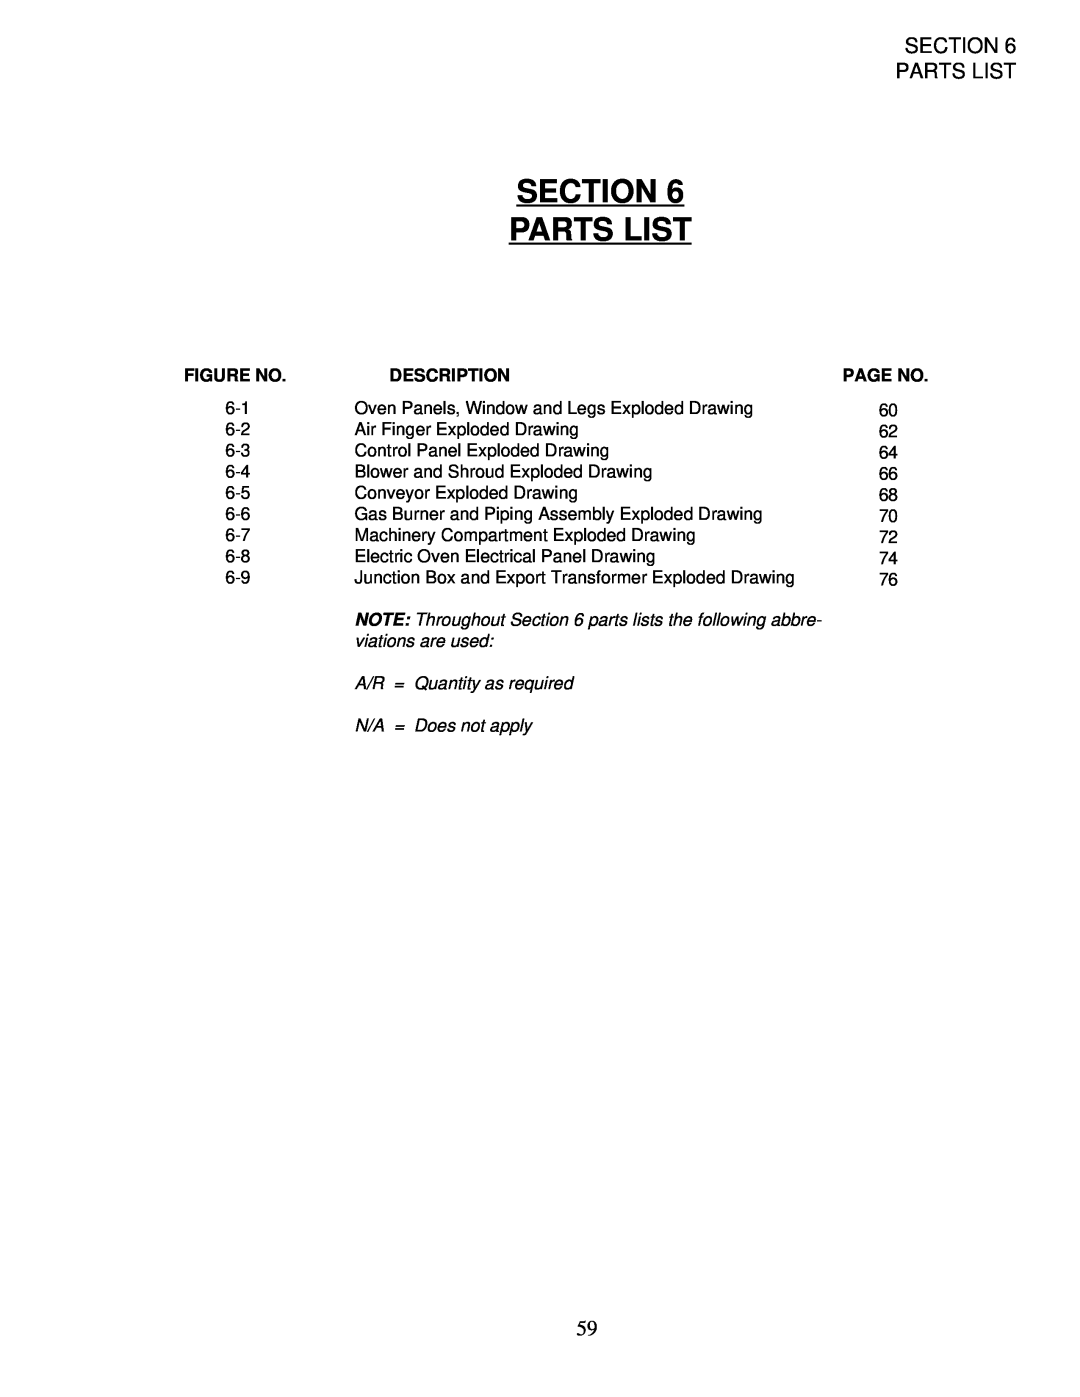 Middleby Marshall PS200-R68 Section Parts List, Figure No, Description, A/R = Quantity as required N/A = Does not apply 